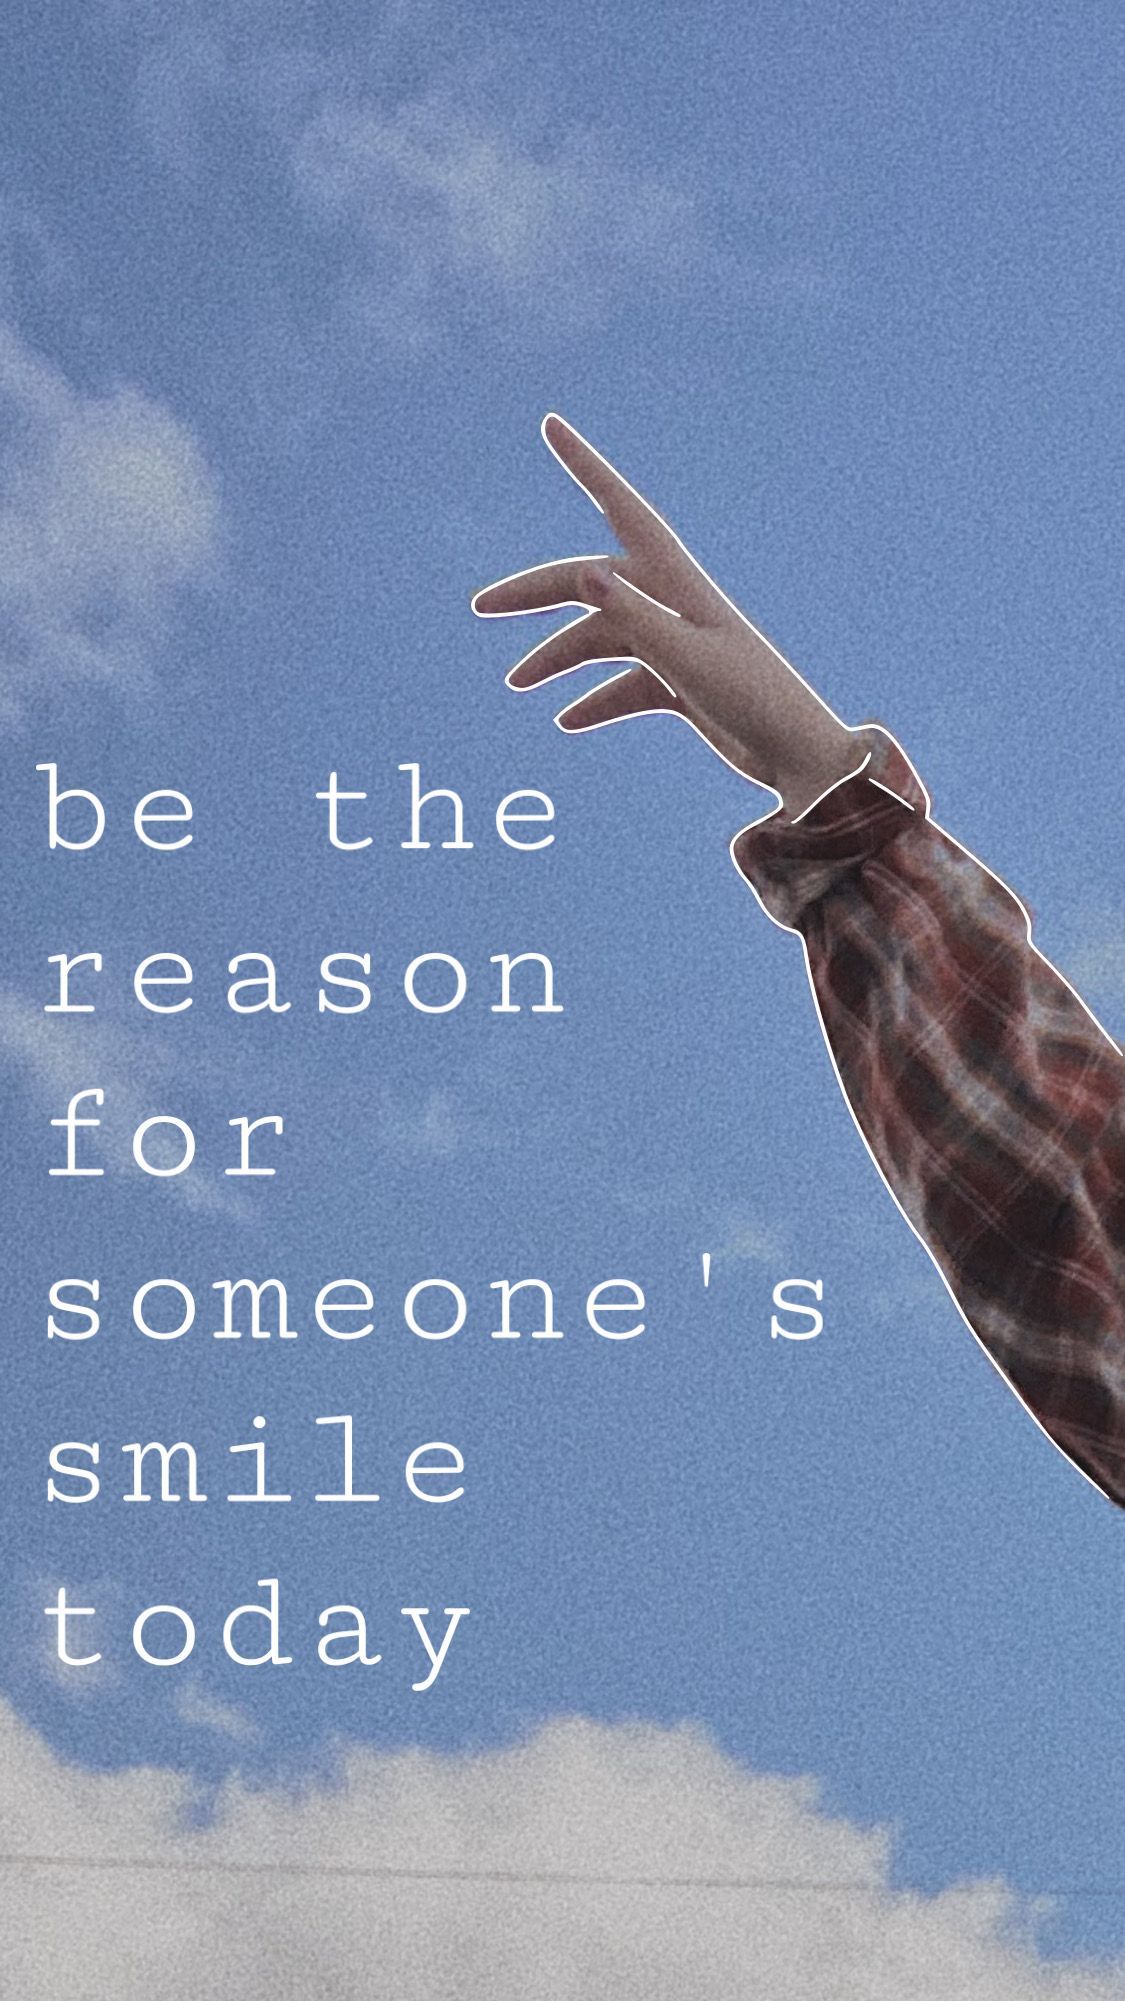 be the reason for someone's smile today wallpaper. Happy wallpaper, Smile wallpaper, Aesthetic wallpaper